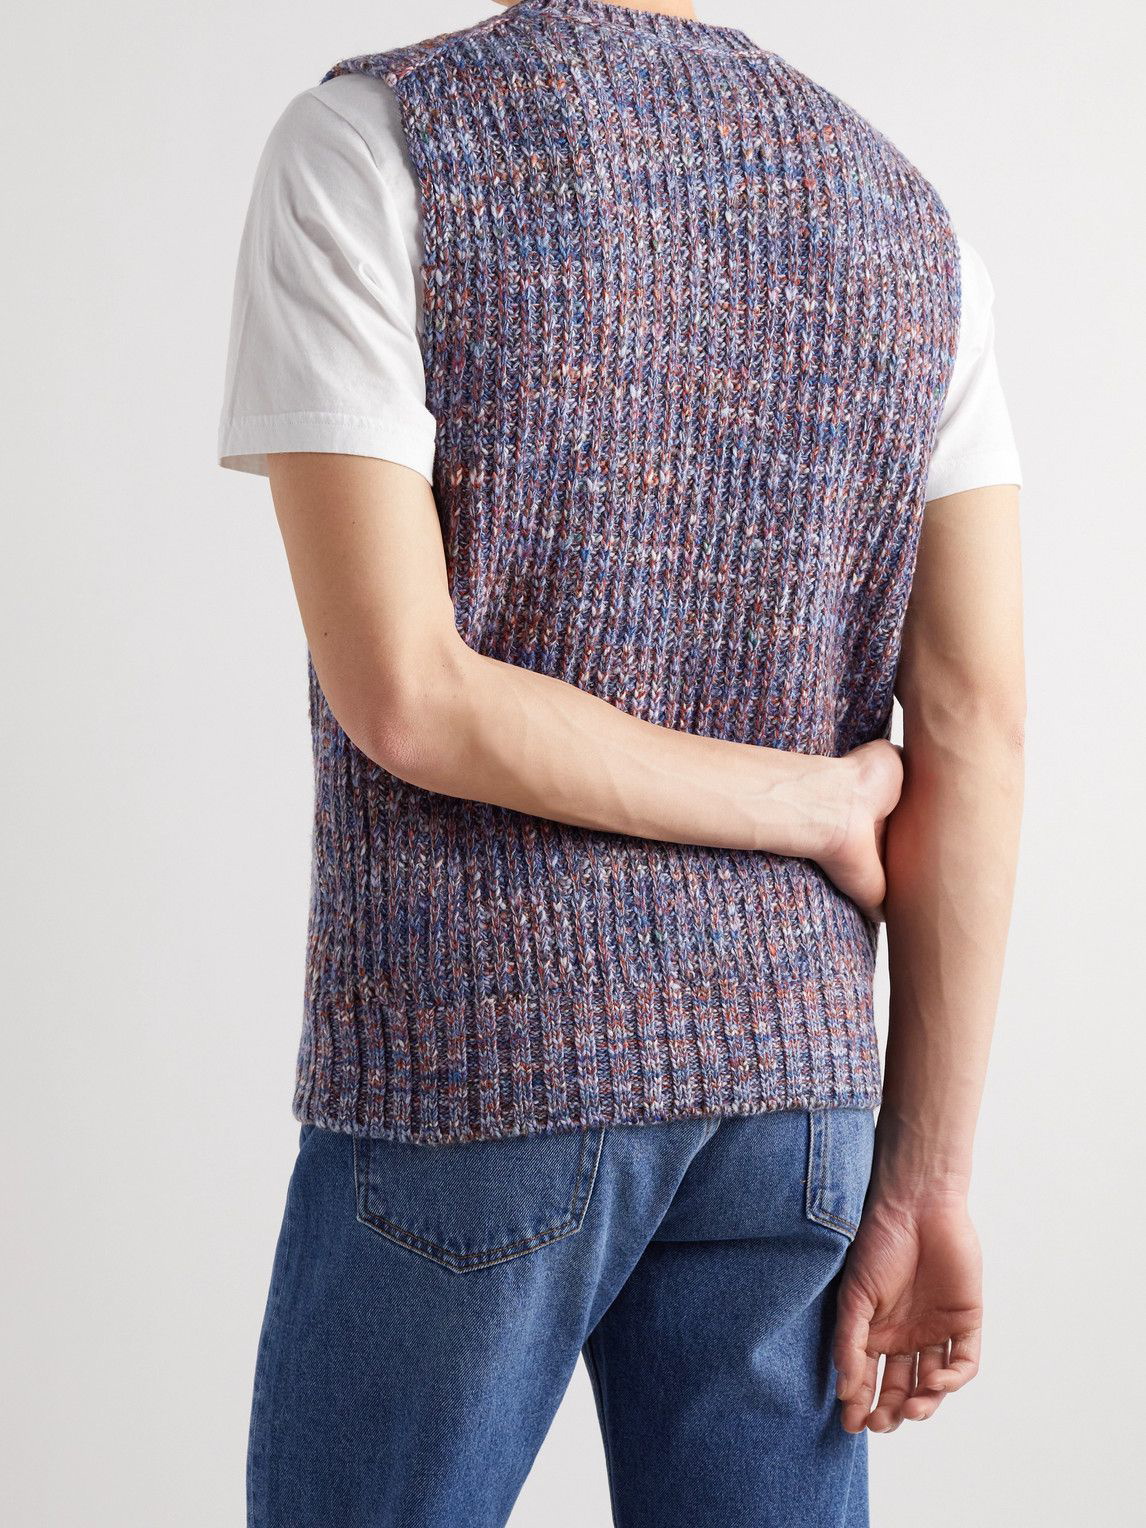 Men's Knitted Vest Sleeveless Sweater Pullover Knitwear Gilet Casual Formal  Tops